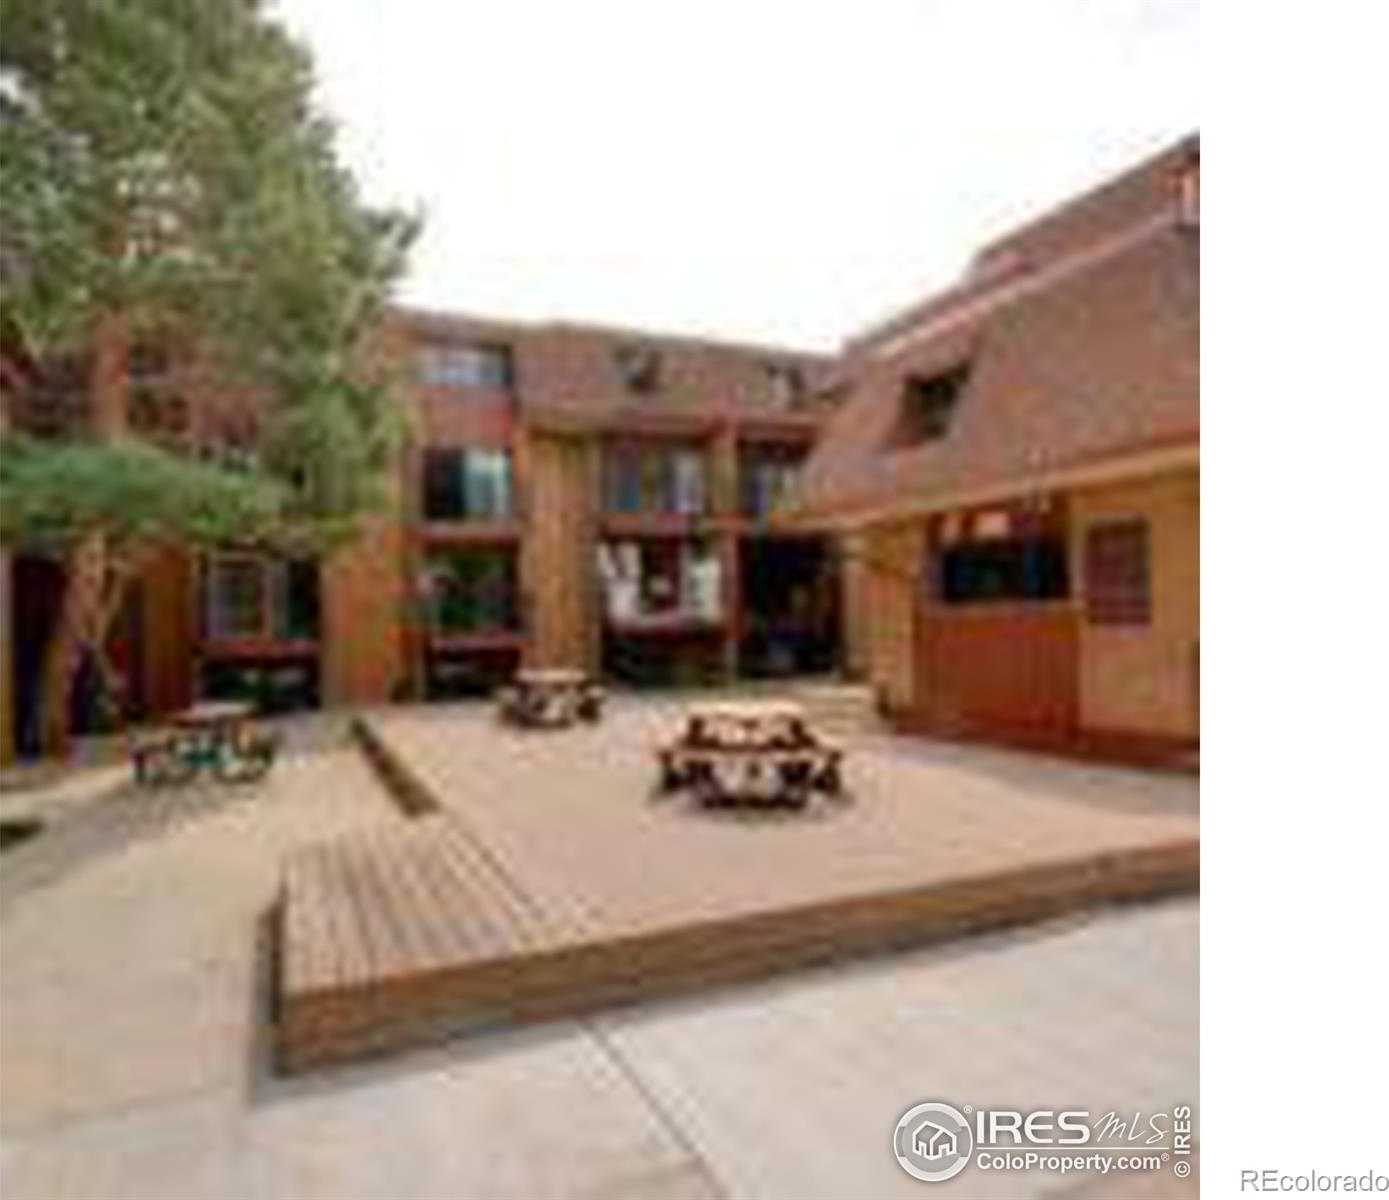 View Boulder, CO 80302 townhome